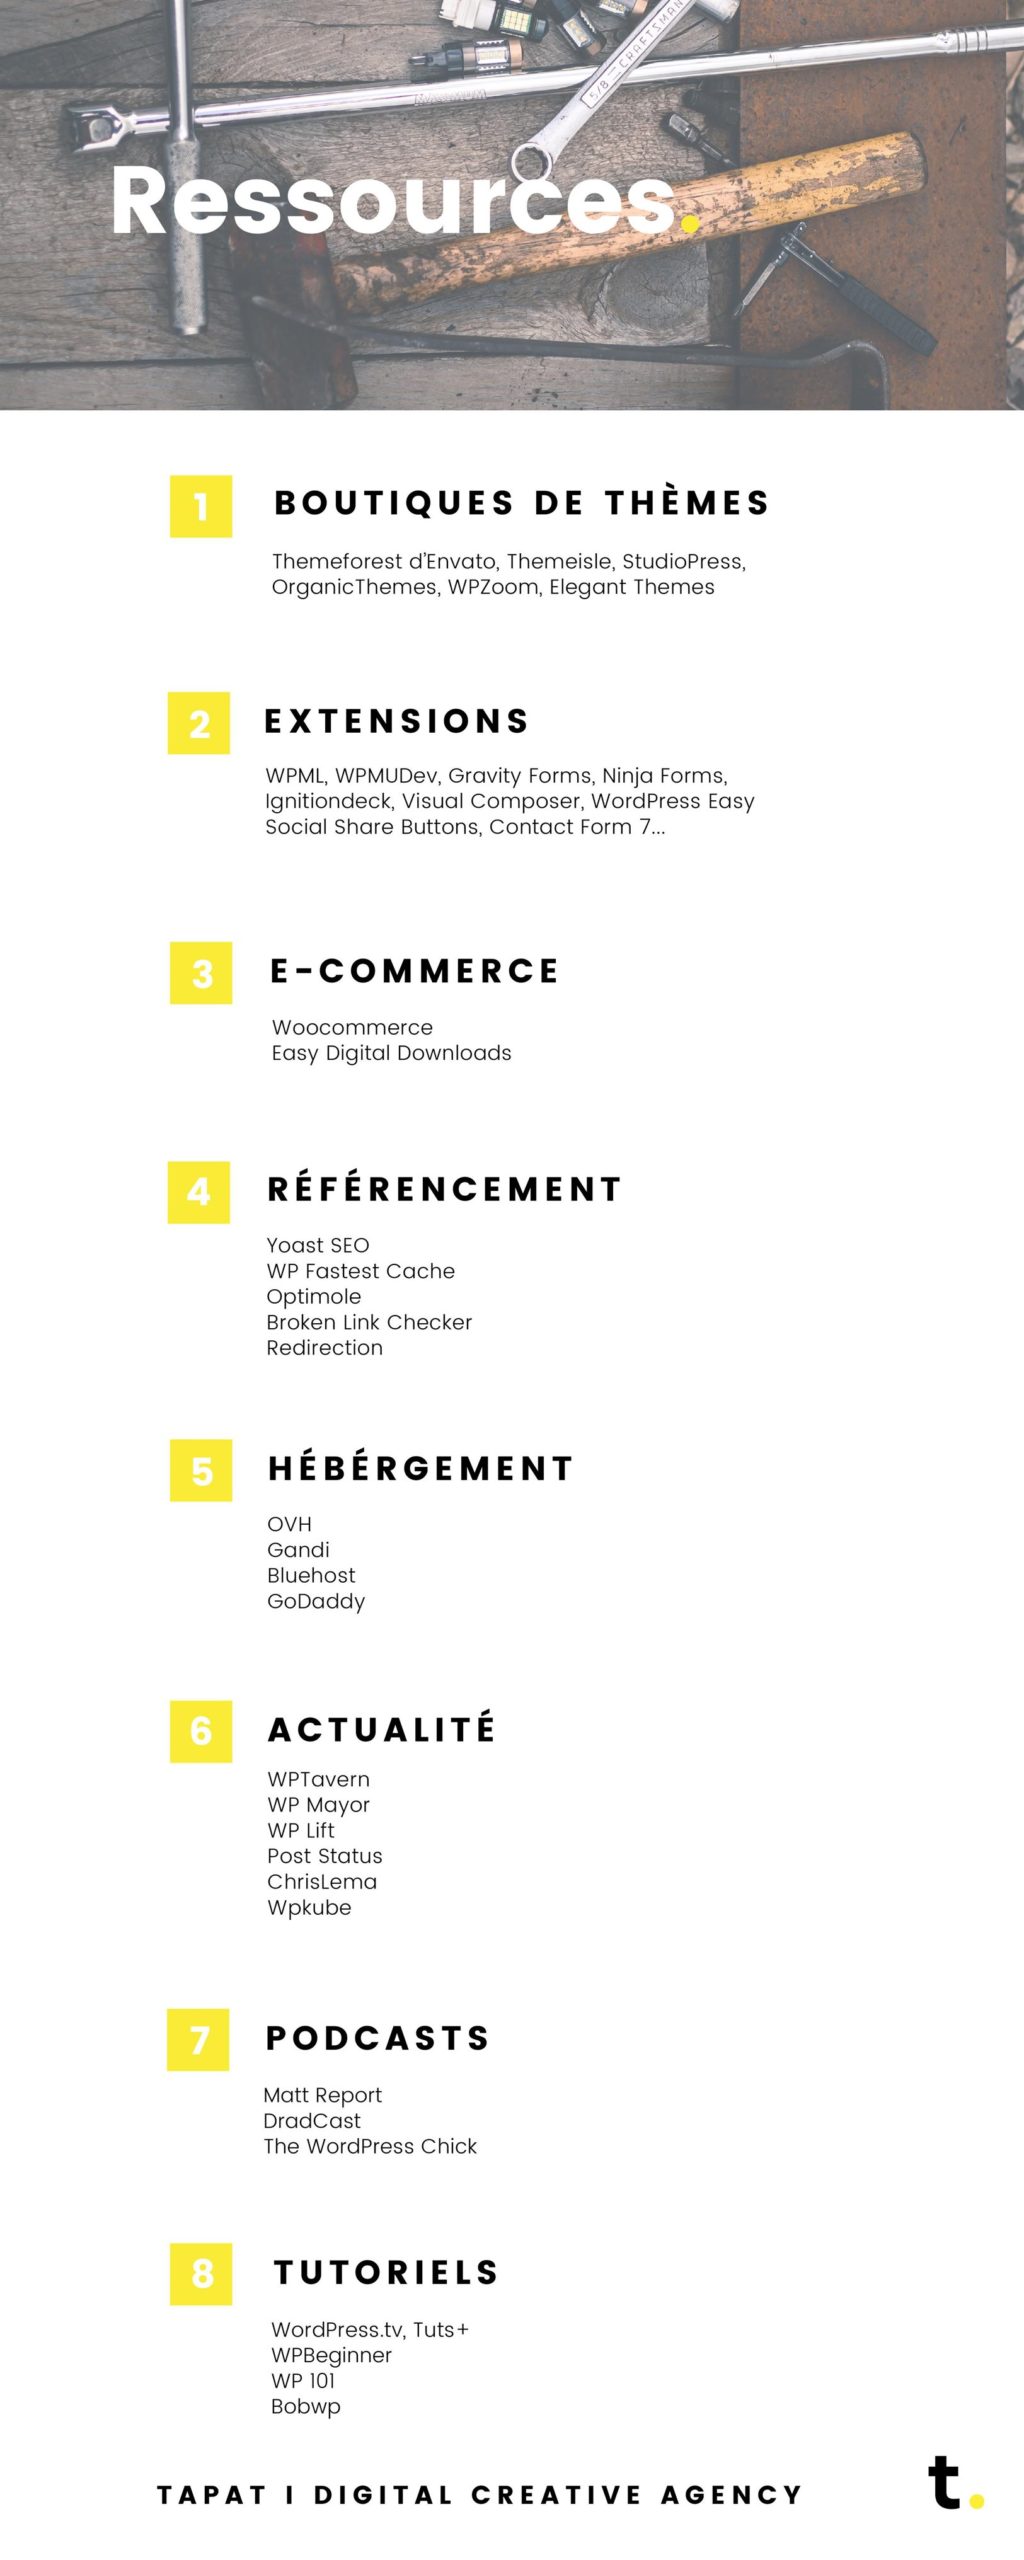 Wordpress infographic 04 resources - tapat creative agency